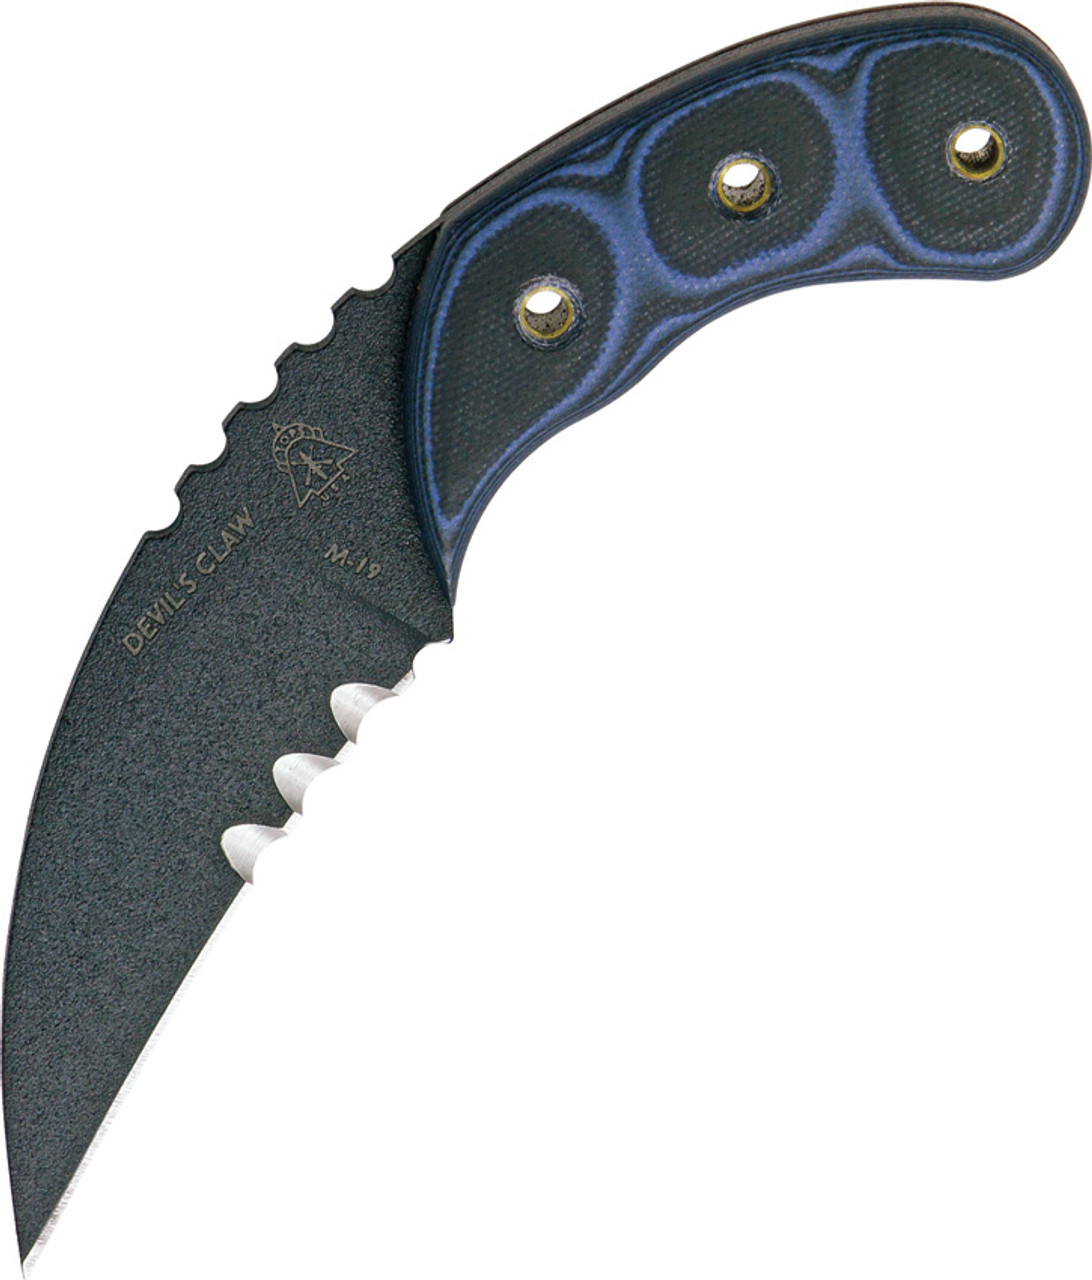 Tops Devil's Claw Knife